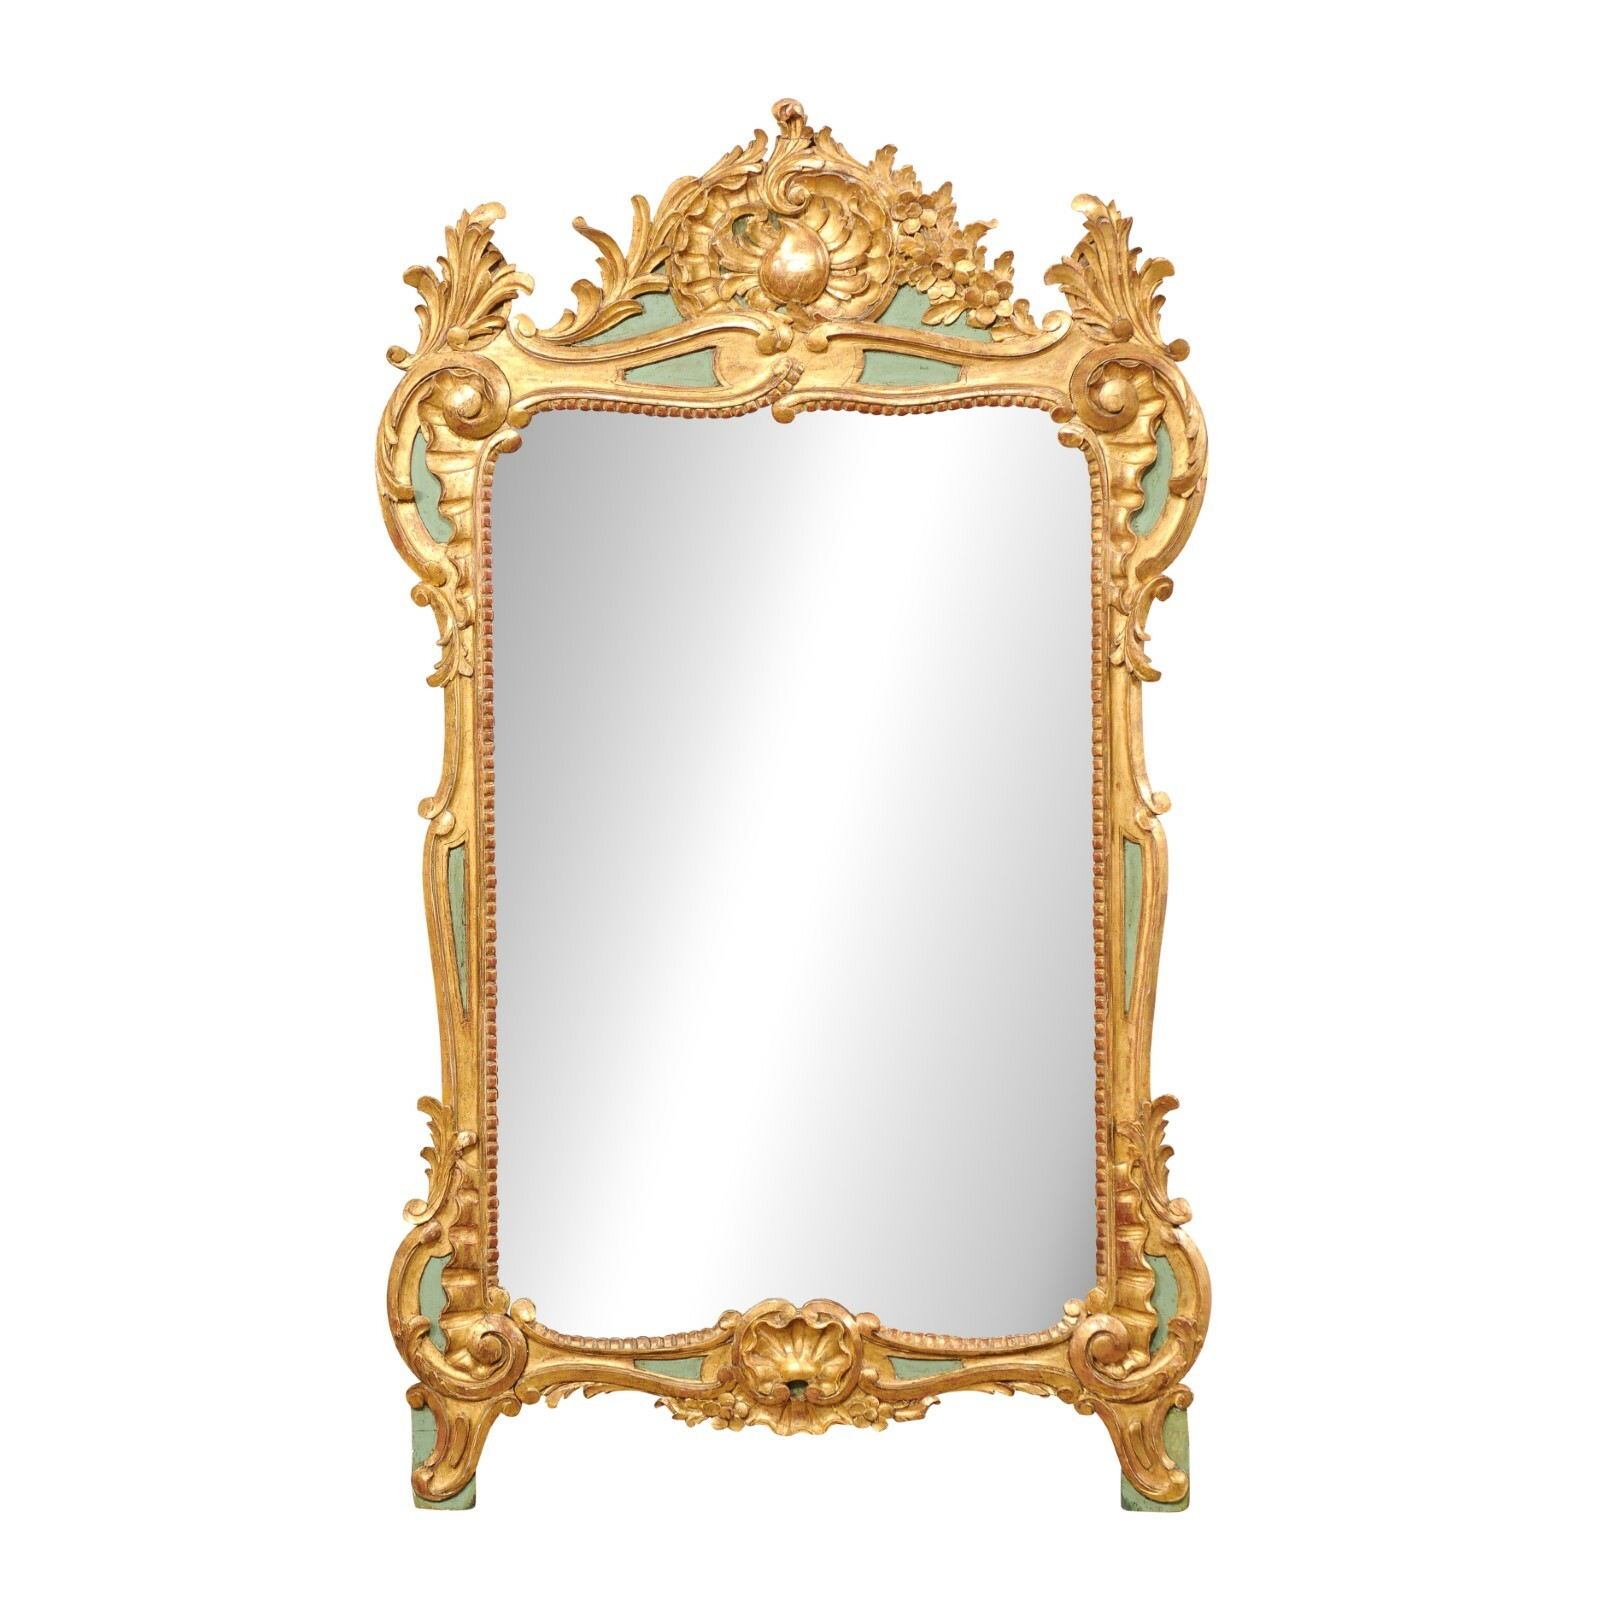 French Rococo Style Mirror, Early 20th C.